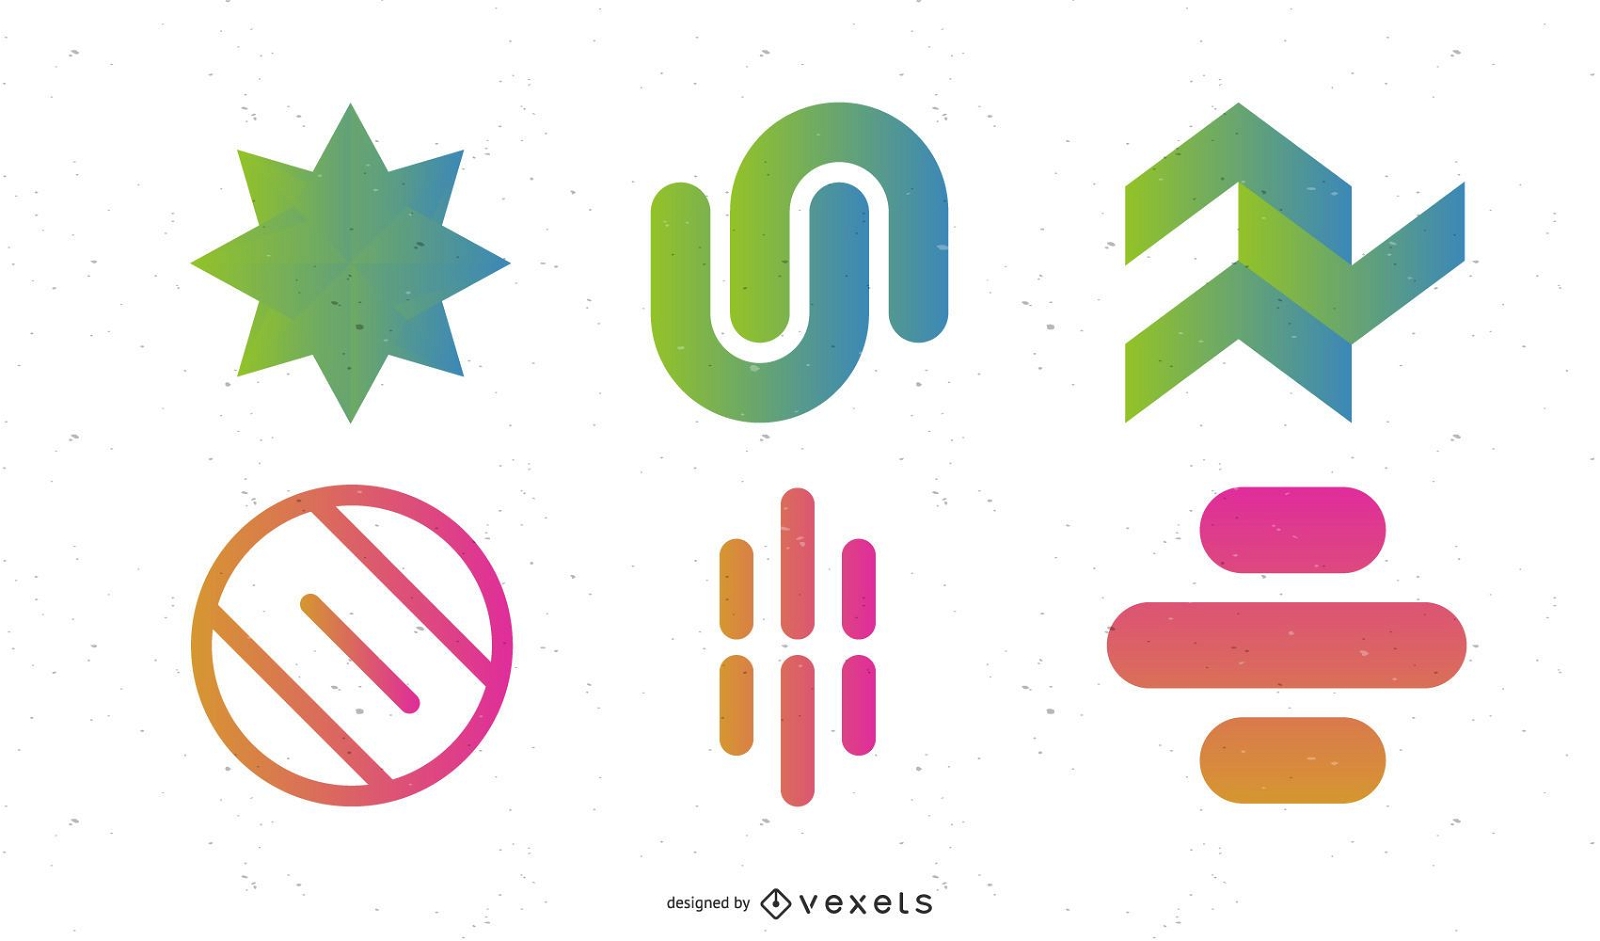 Abstract Colorful Design Elements Vector Set